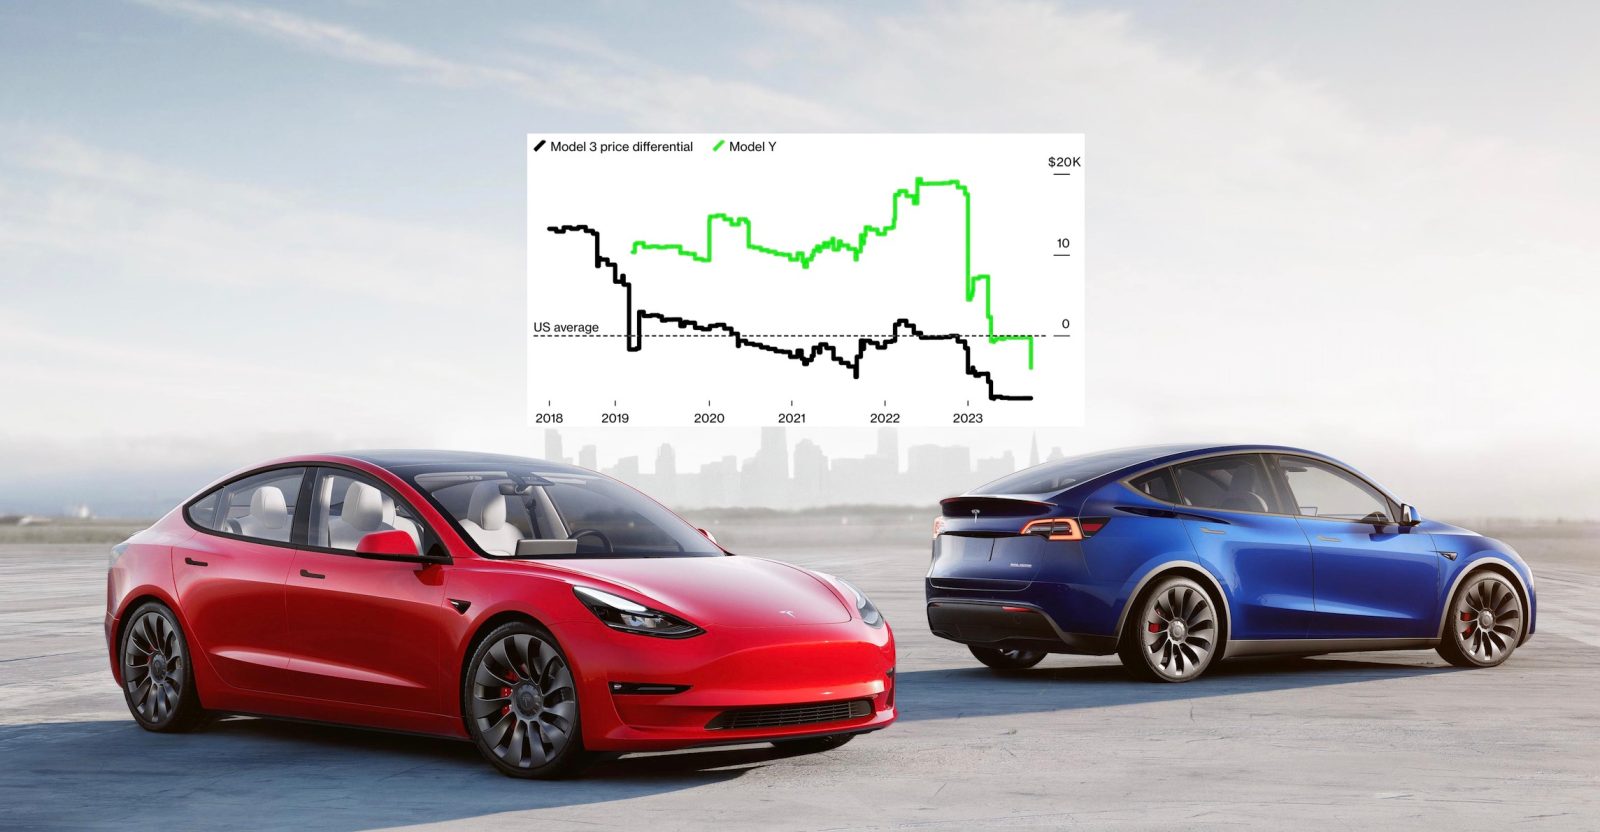 Tesla base models are now cheaper than the average new car in the